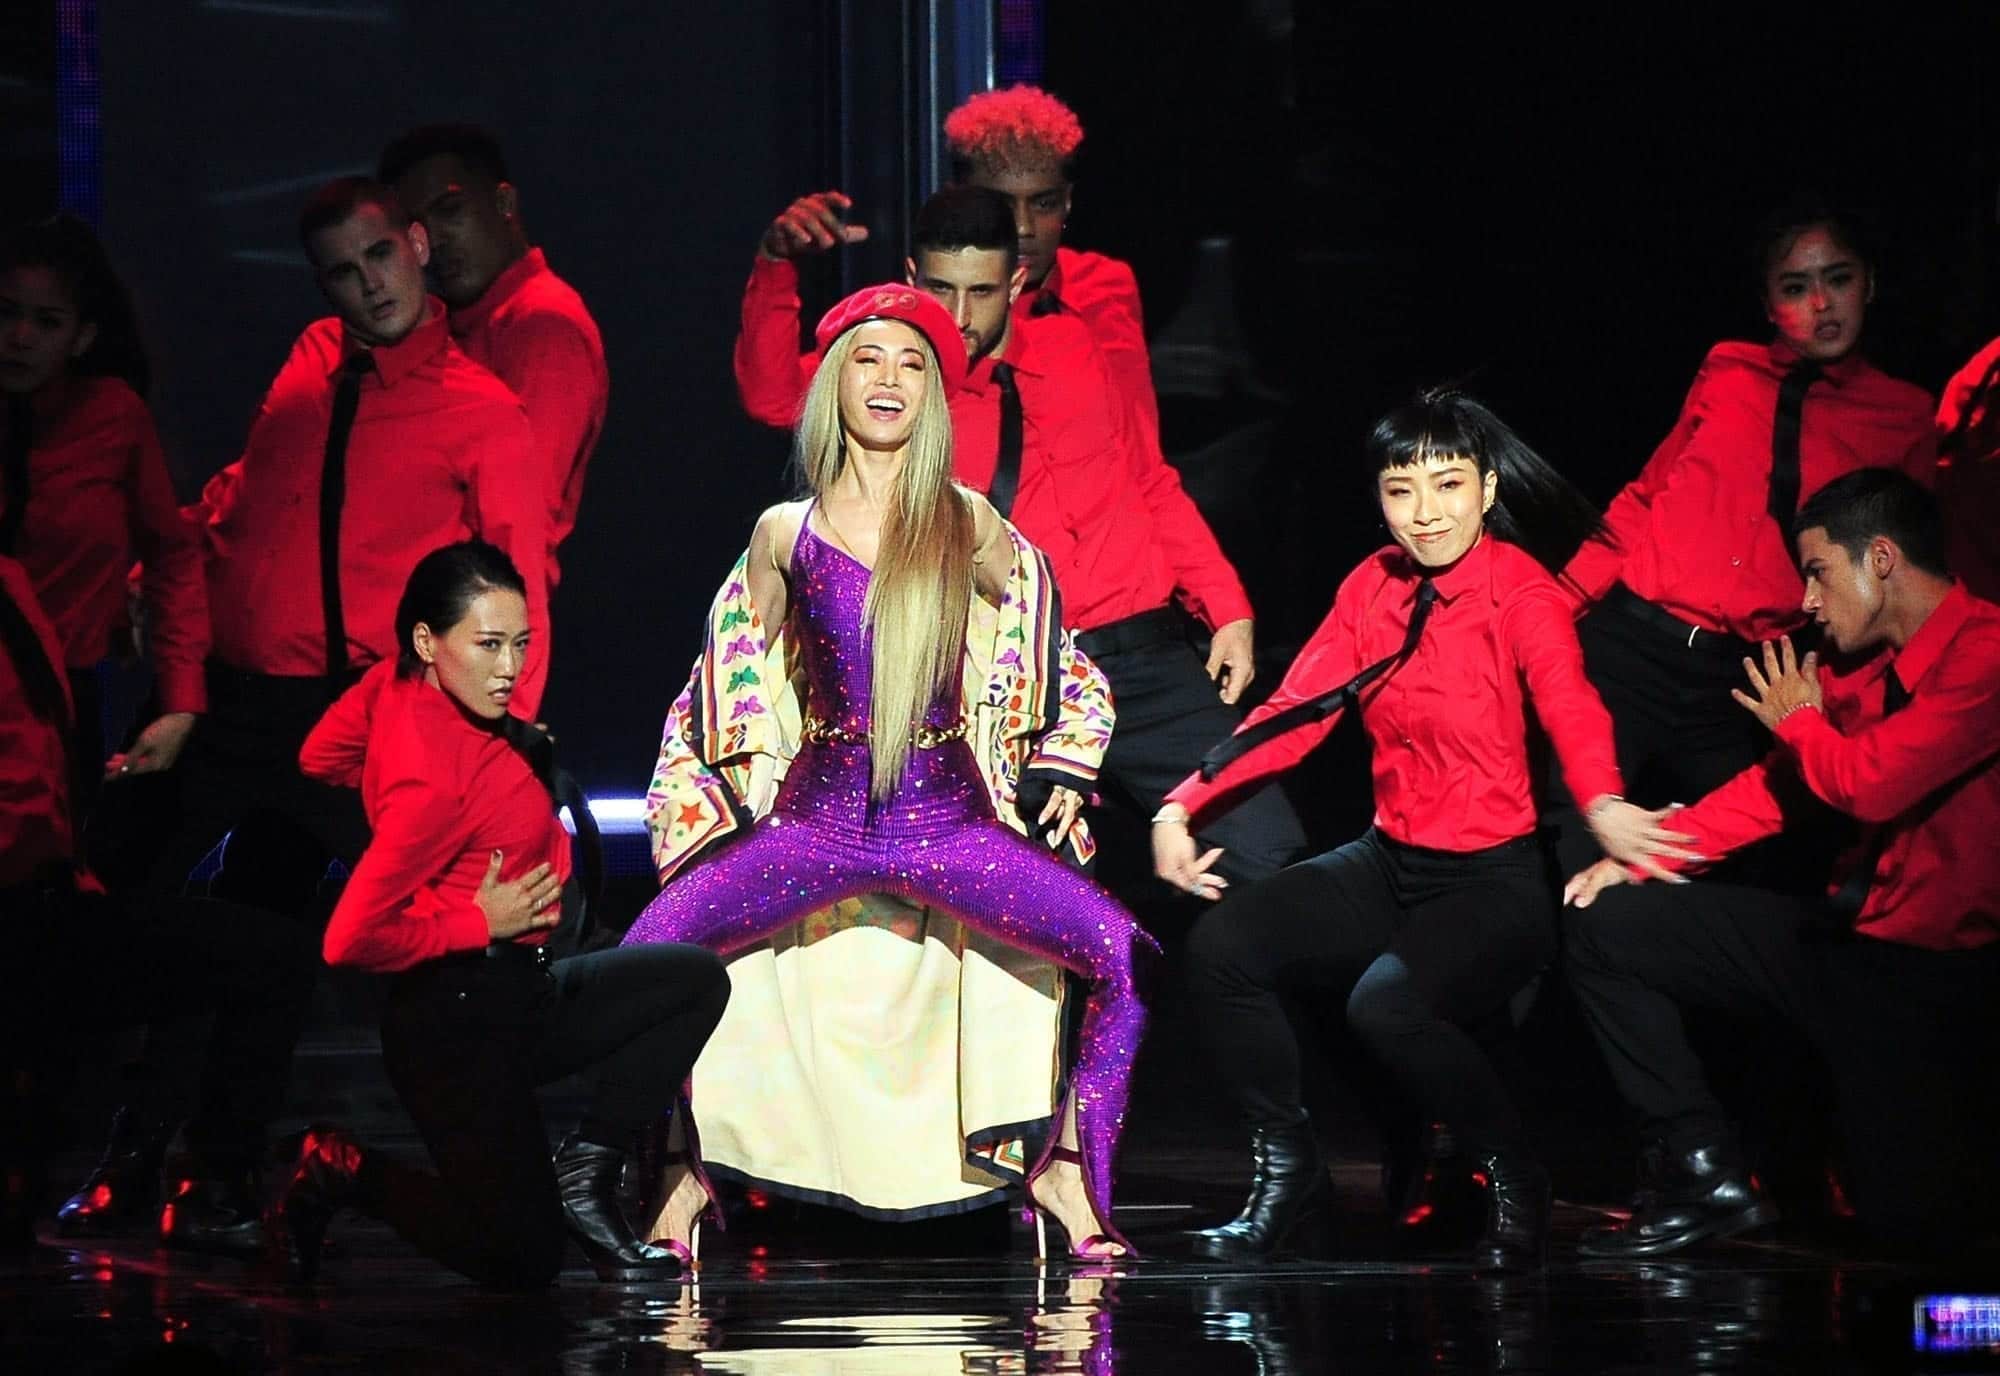 Jolin Tsai performed with 32 dancers on a mesmerizing stage and arrangement.